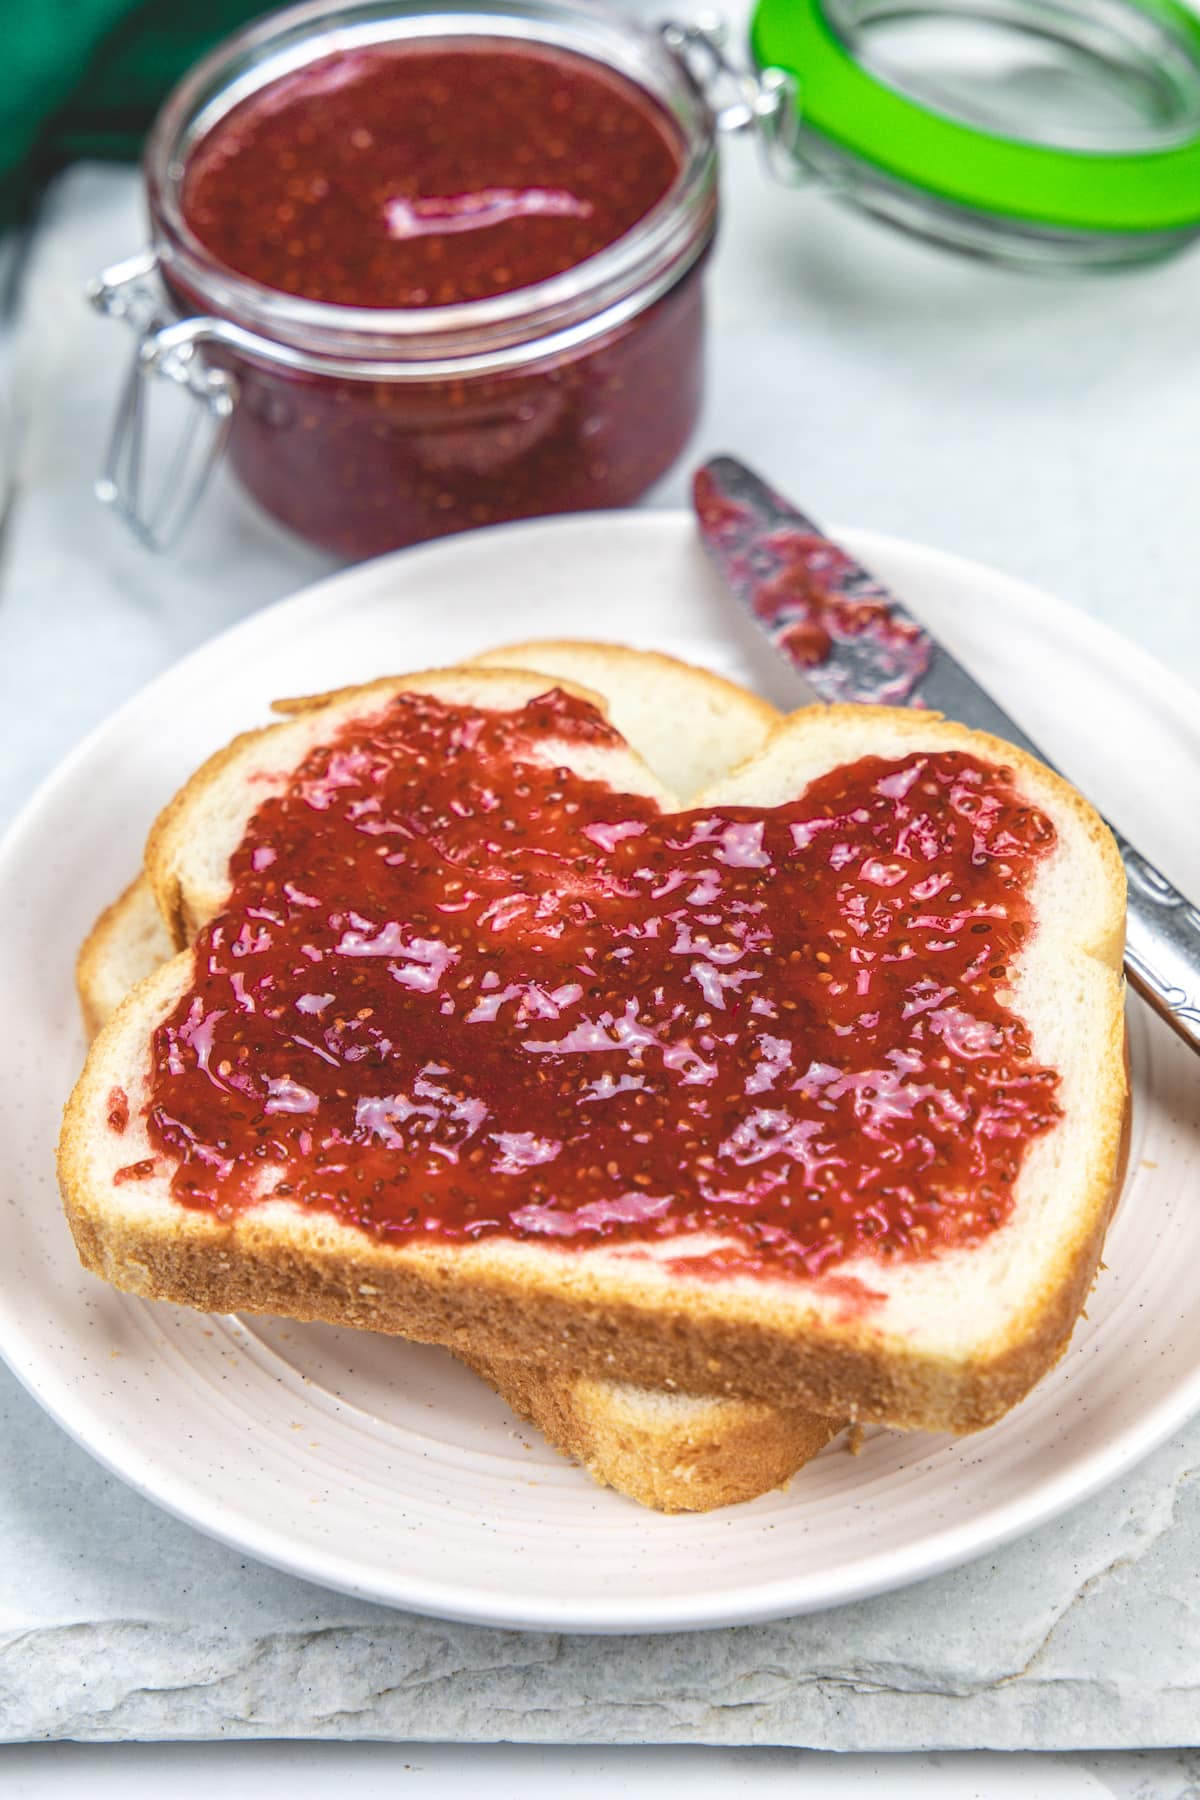 Strawberry chia jam spreaded on a bread slice with a jar of jam in the back.